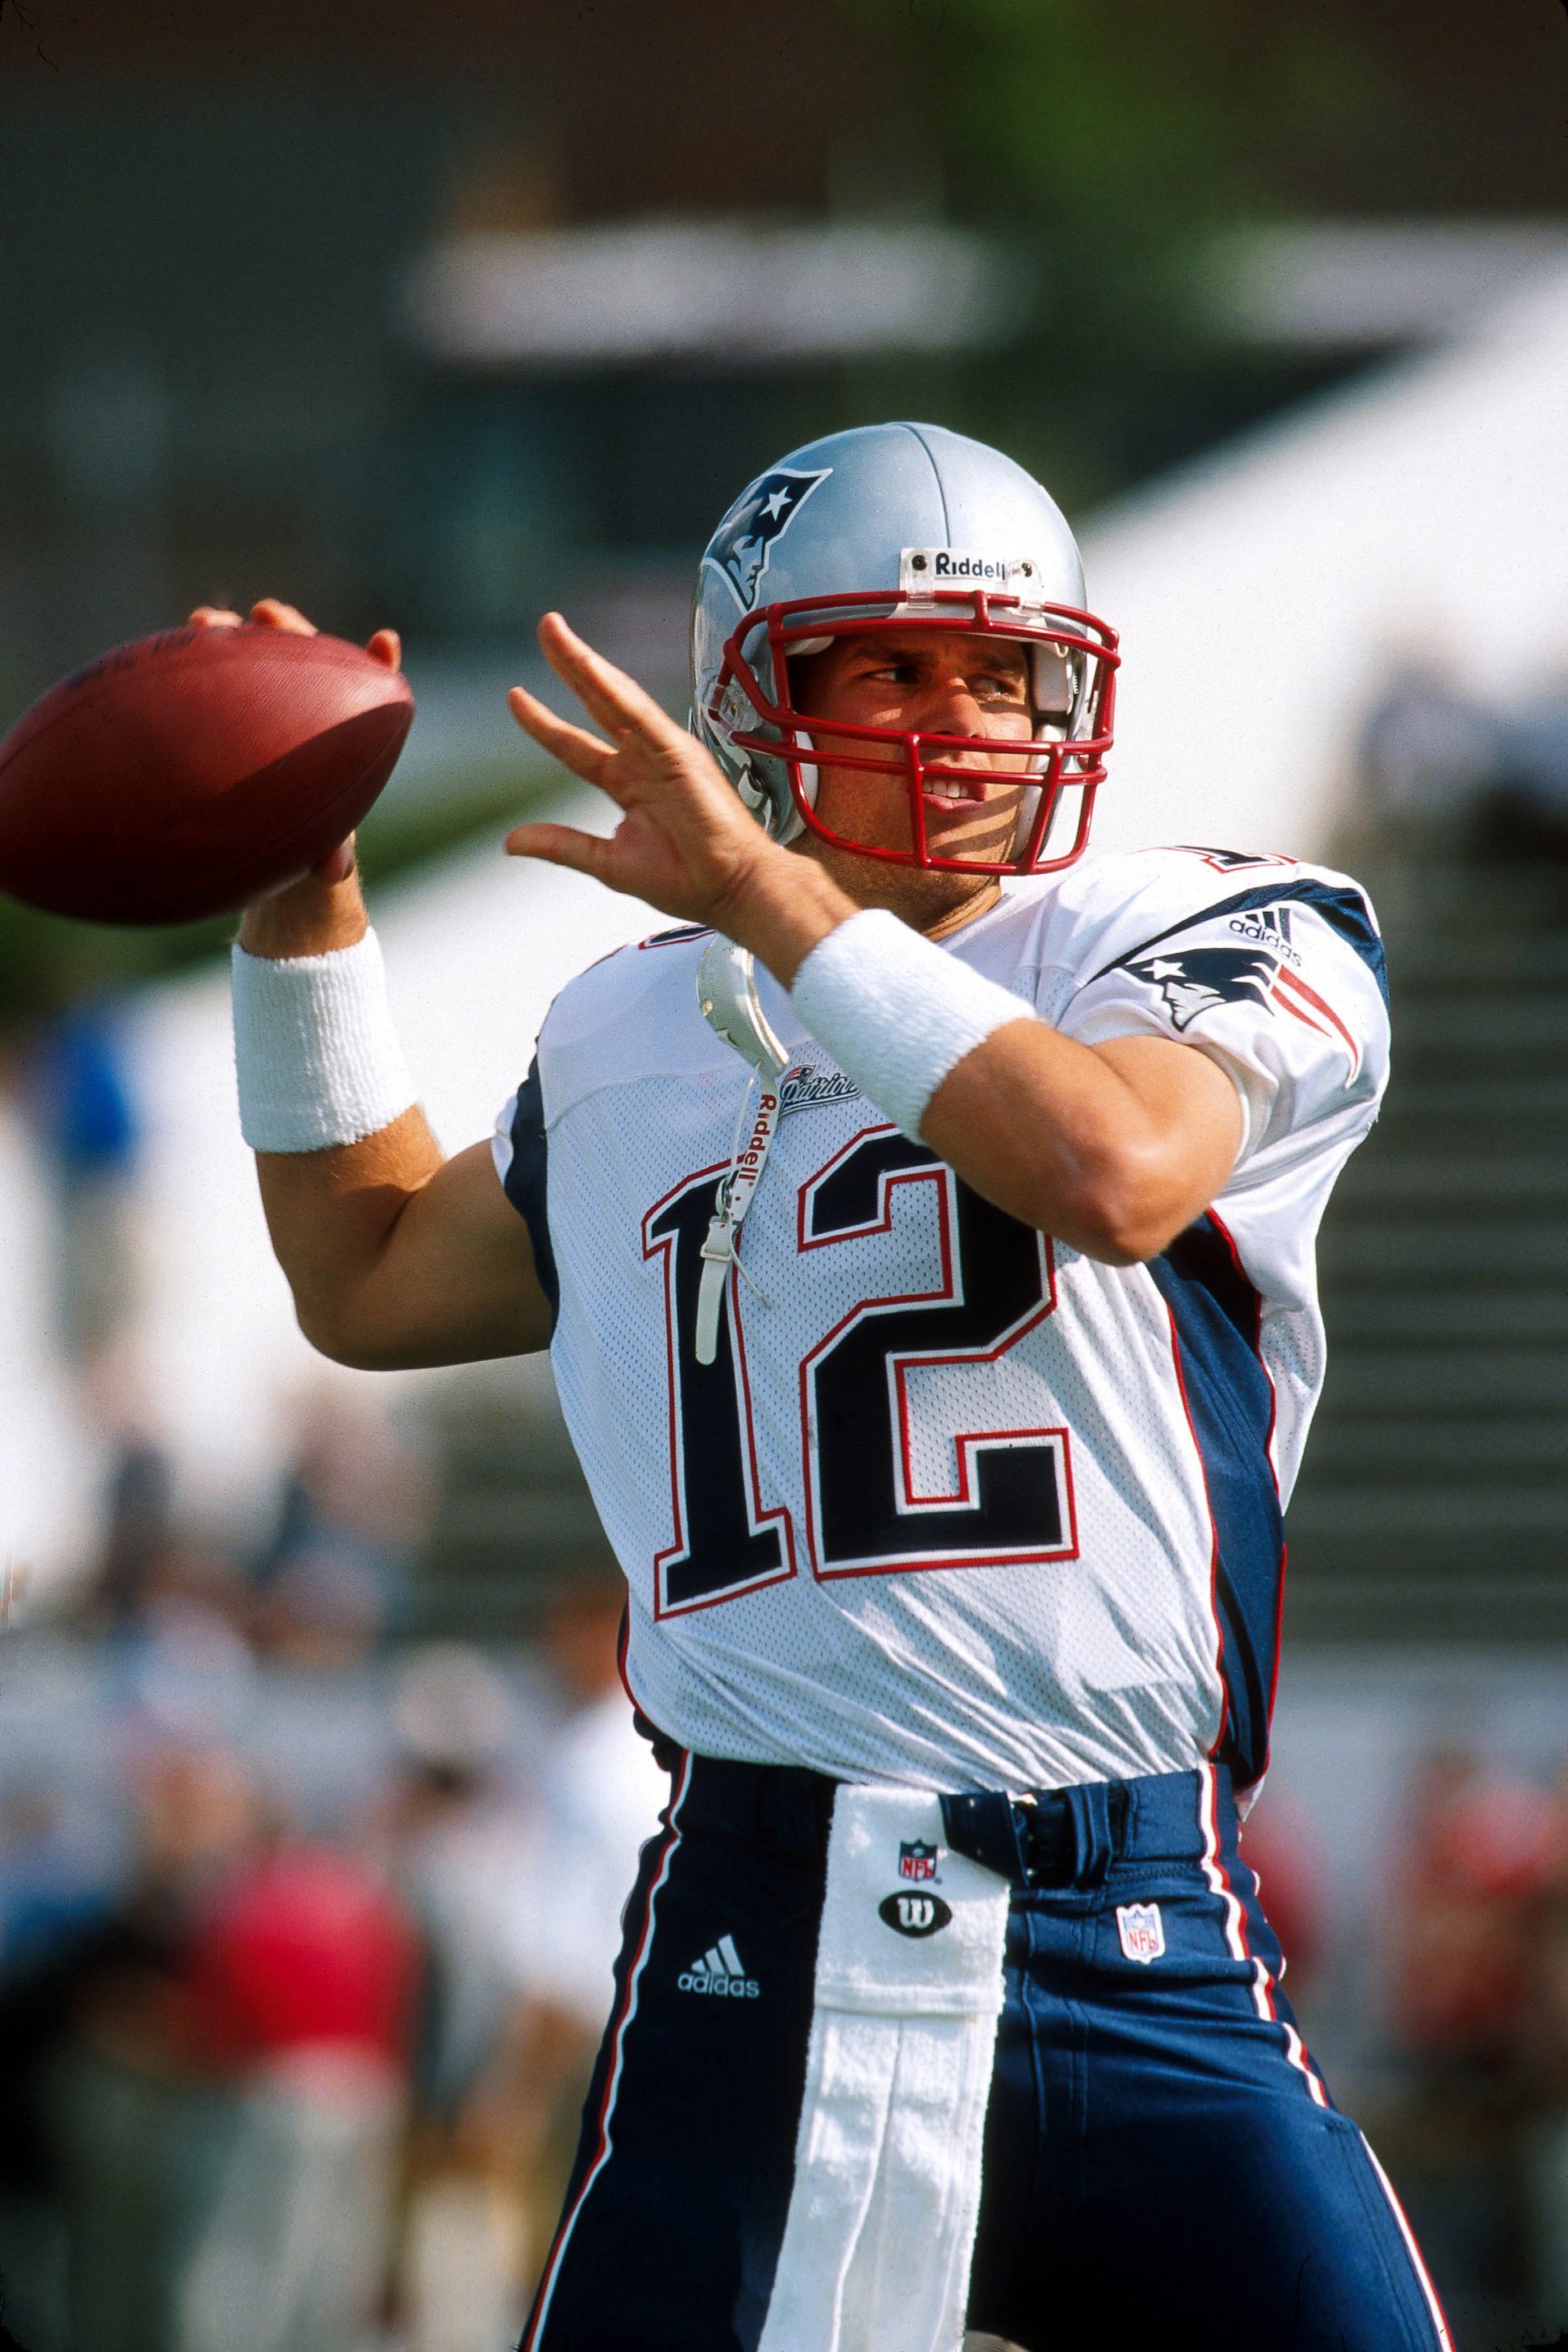 PHOTO: Quarterback Tom Brady (12) of the New England Patriots sets up to pass during pre-game drills before a 20 - 0 victory over the San Francisco 49ers on July 31, 2000, at Fawcett Stadium in Canton, Ohio. 